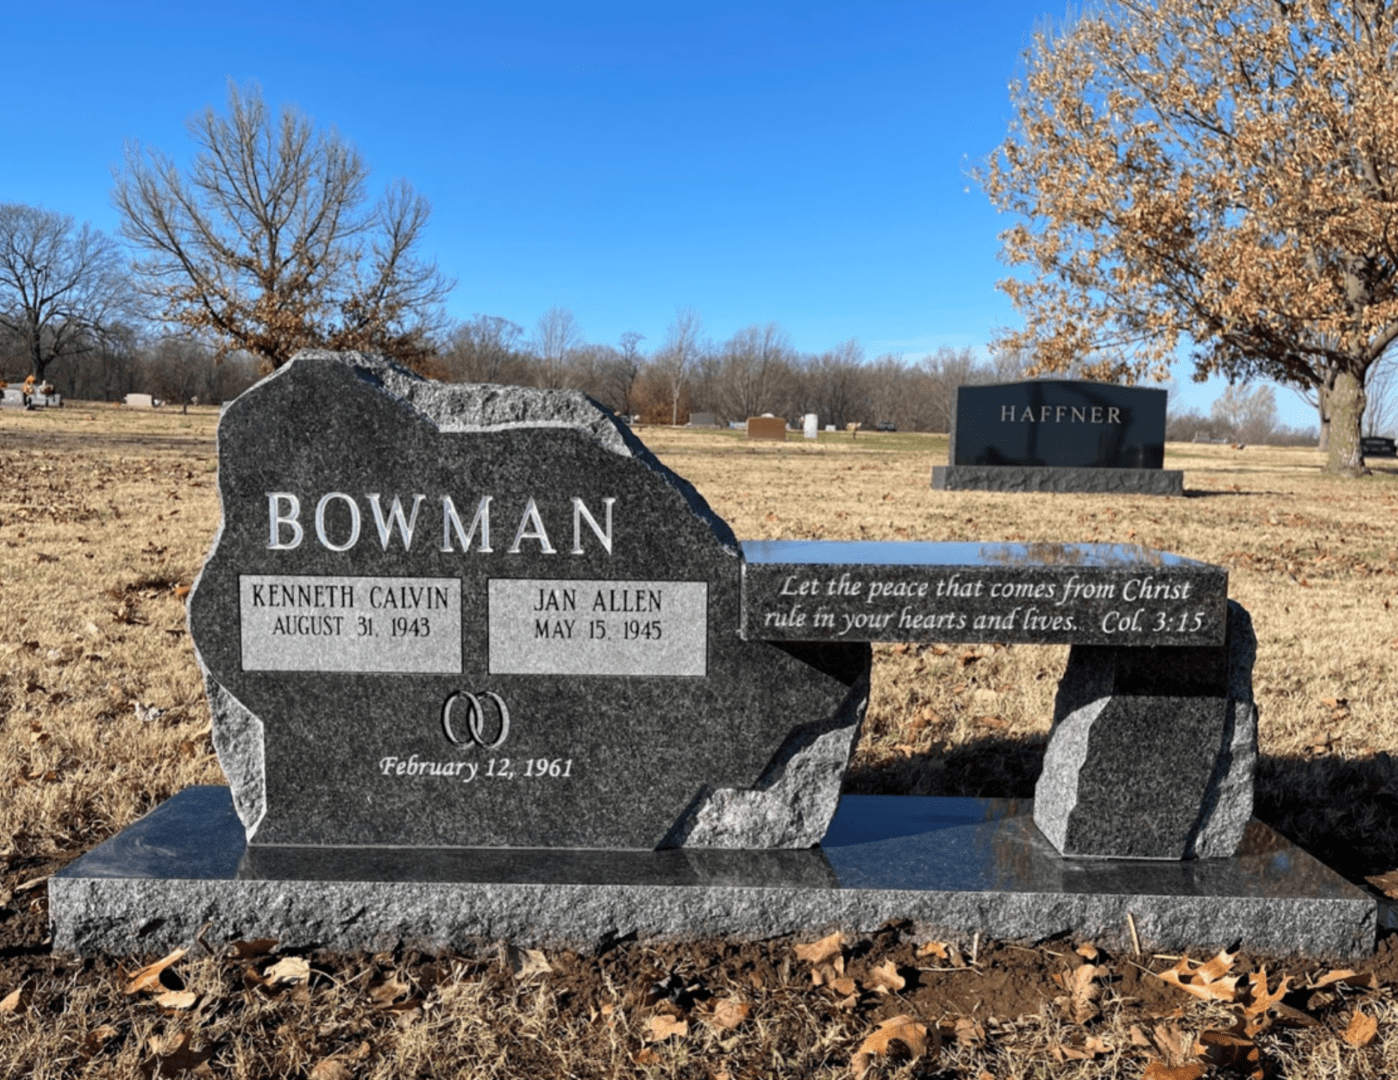 A stone monument with the names of two people who are buried together.